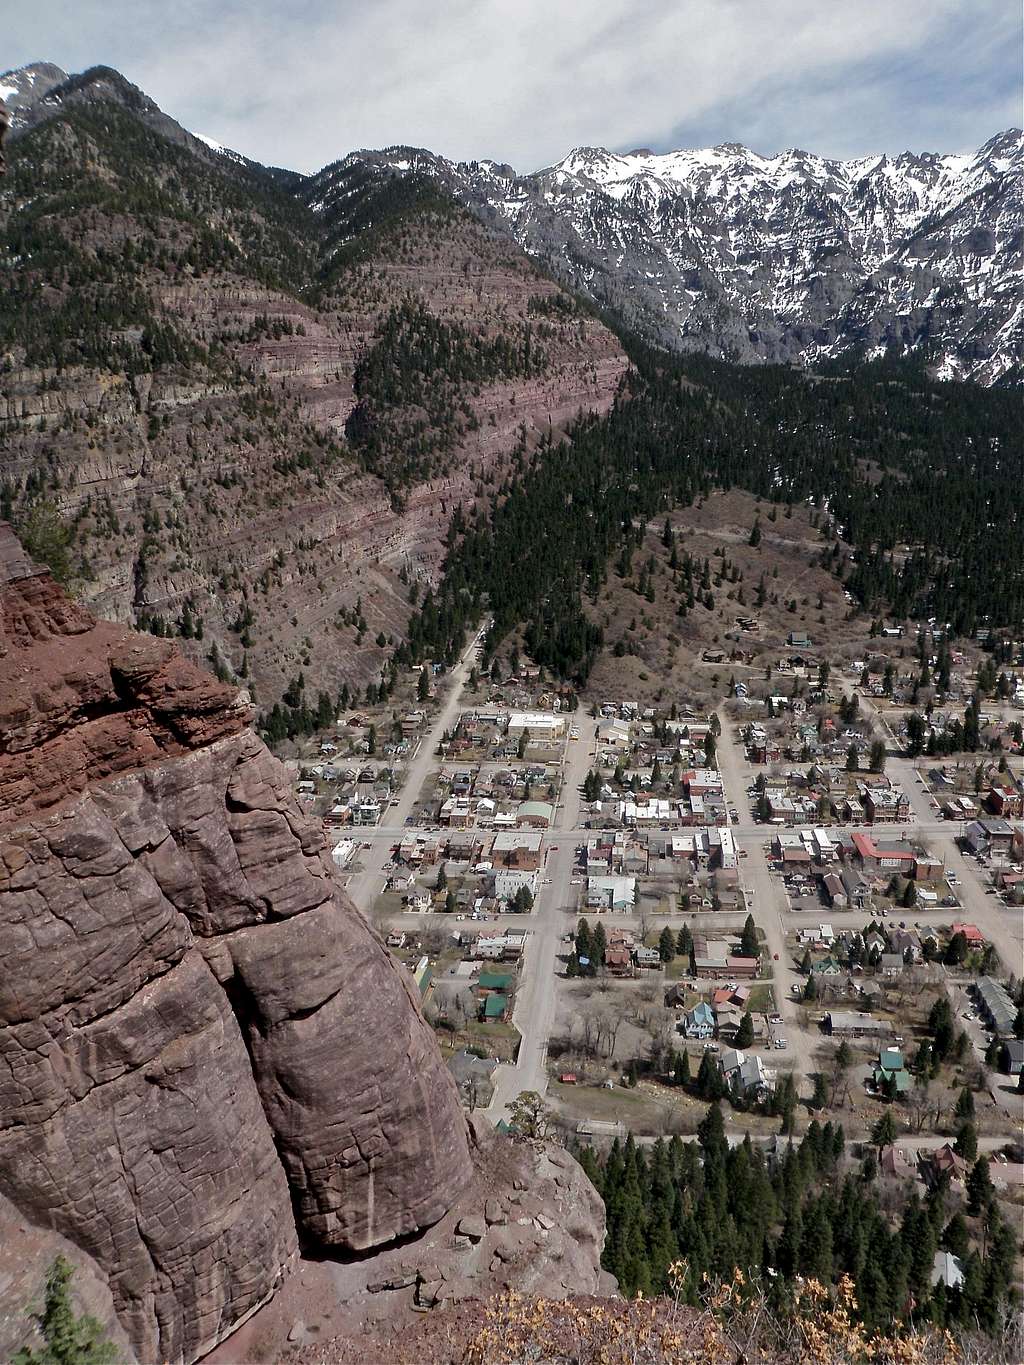 Ouray as seen from the climb